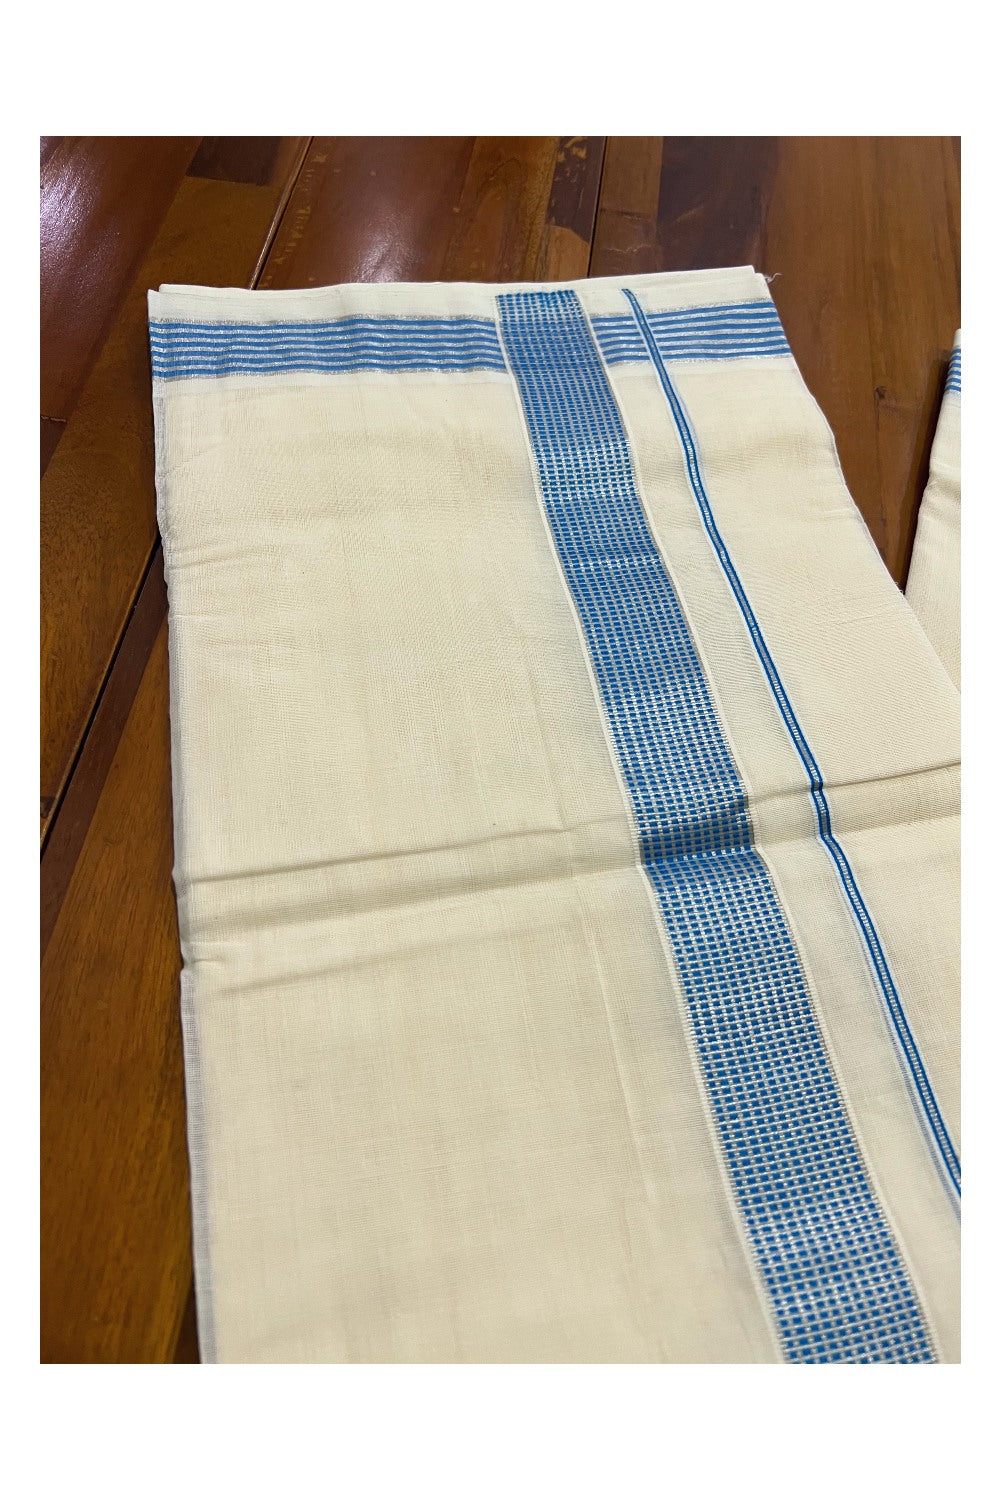 Southloom Kuthampully Handloom Pure Cotton Mundu with Silver Kasavu and Blue Border (South Indian Dhoti)